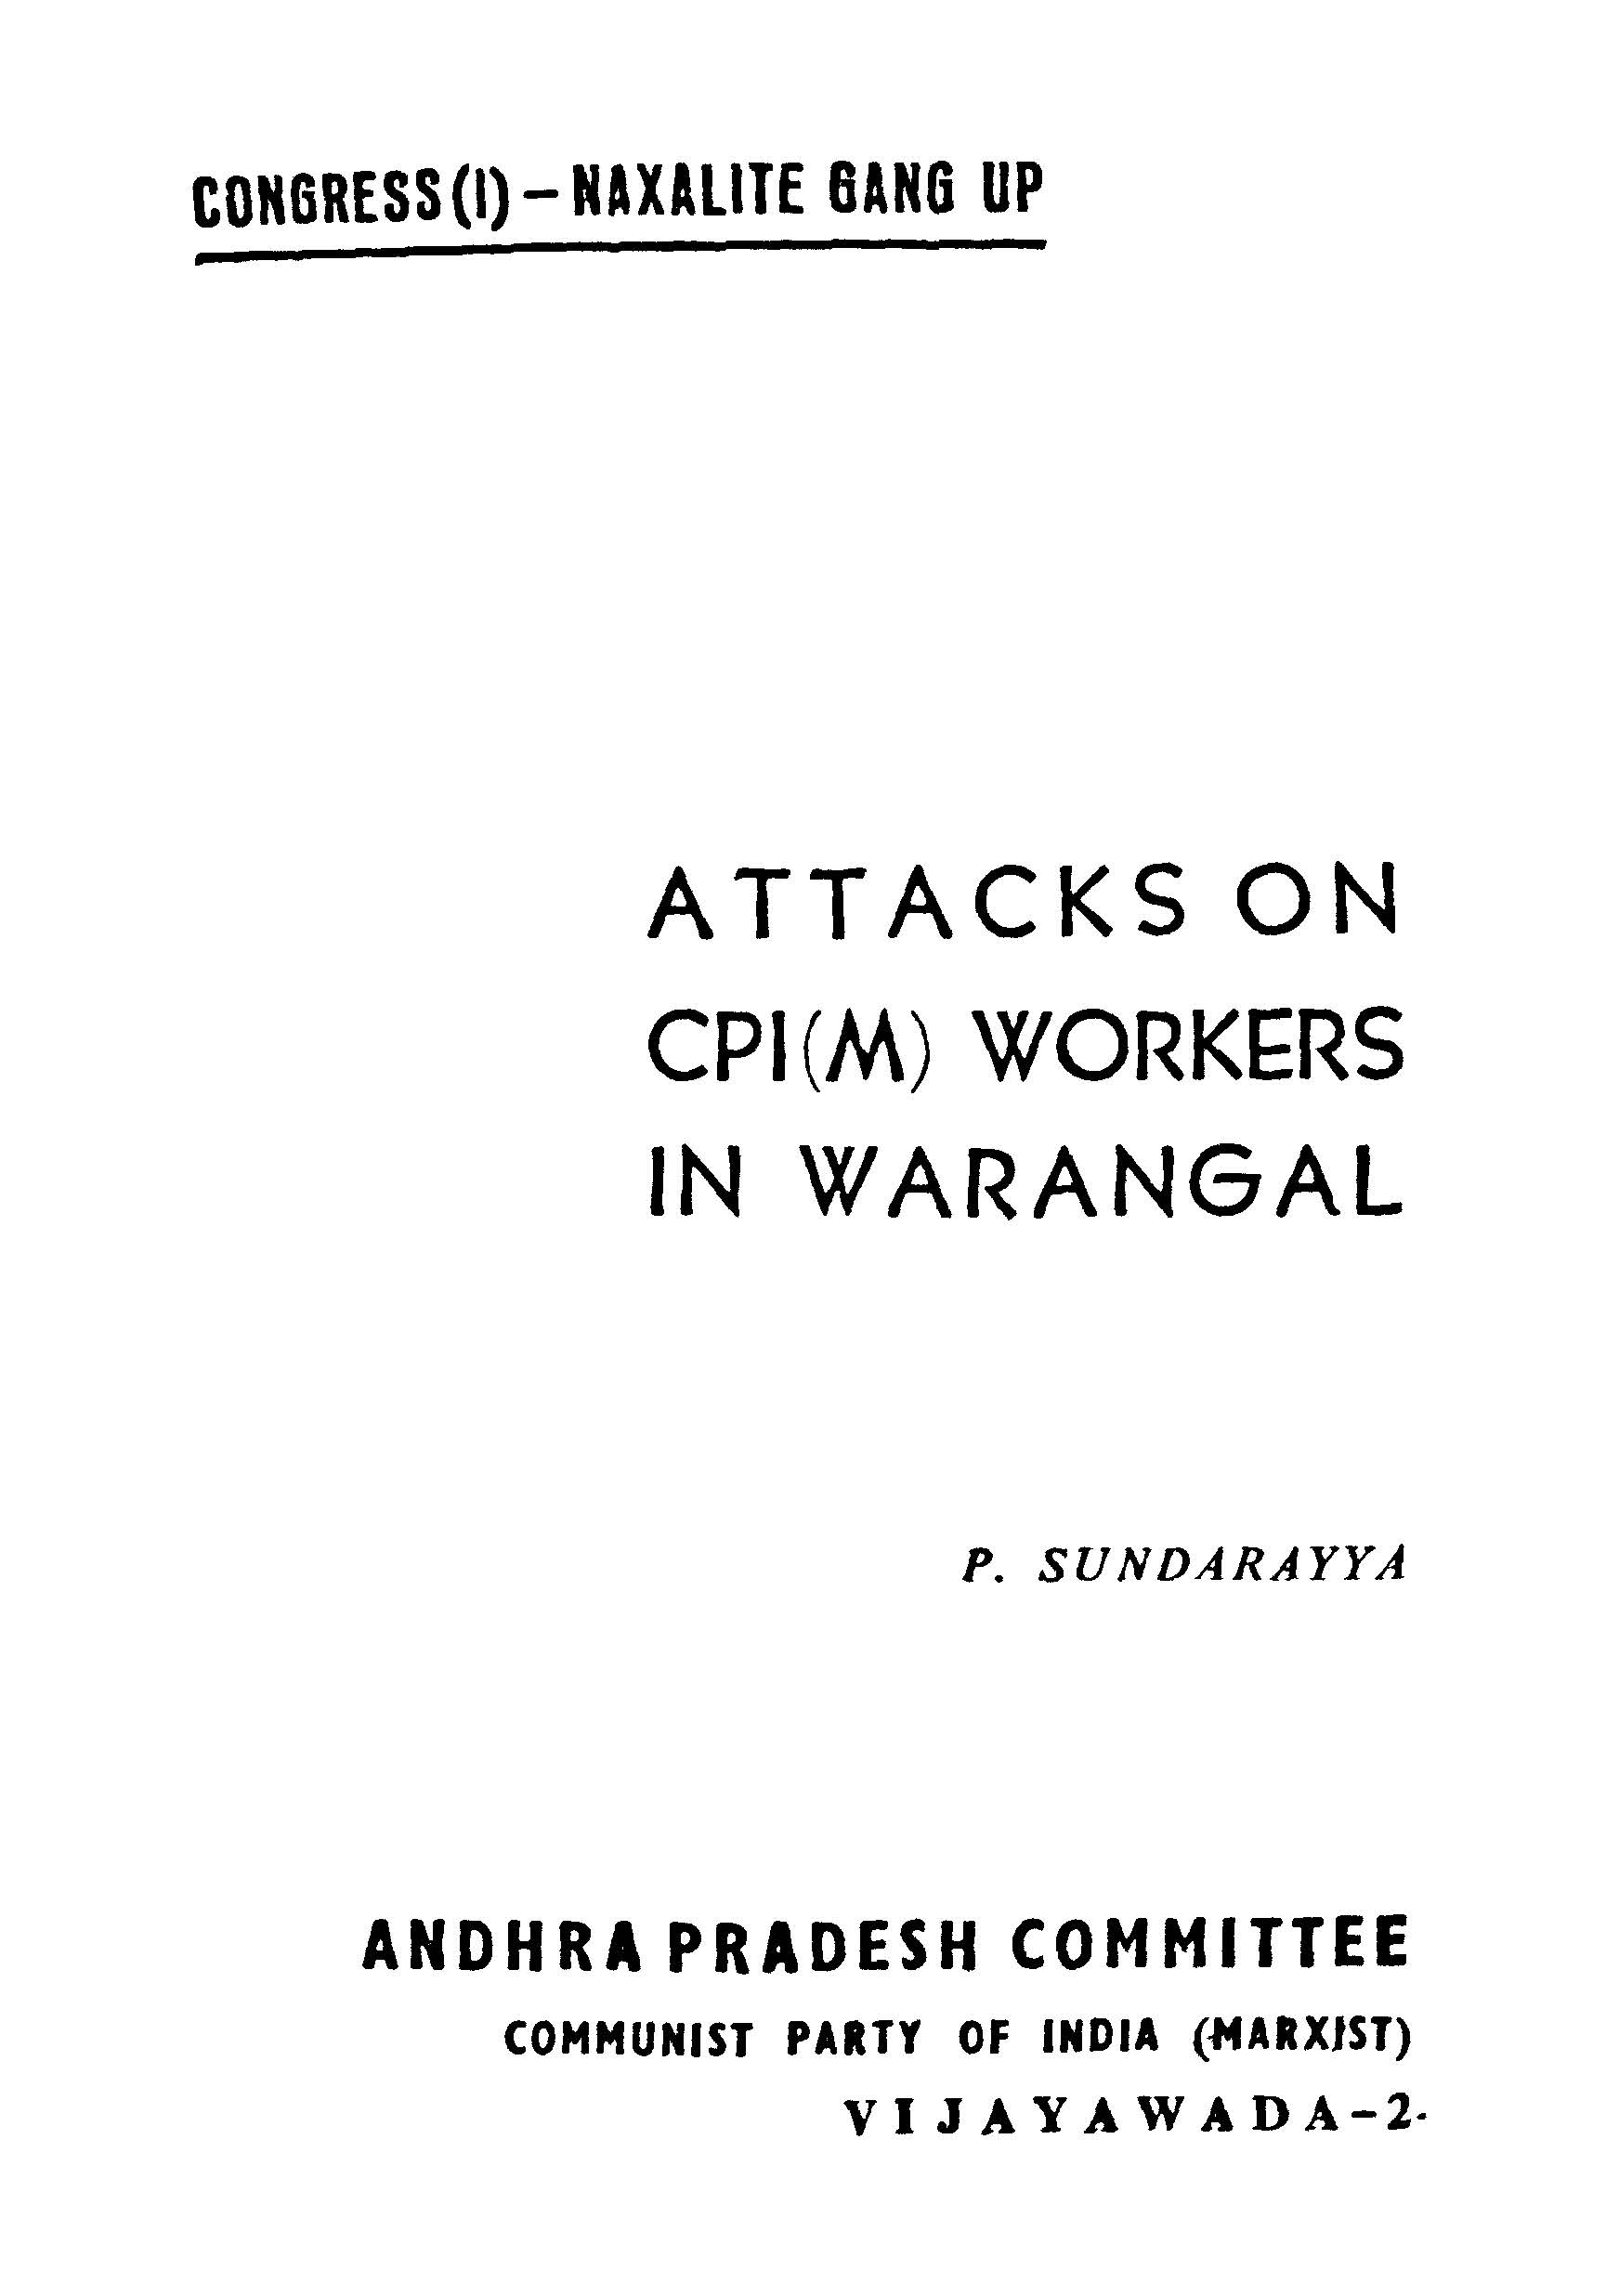 Attacks On CPI(M) Workers In Warangal